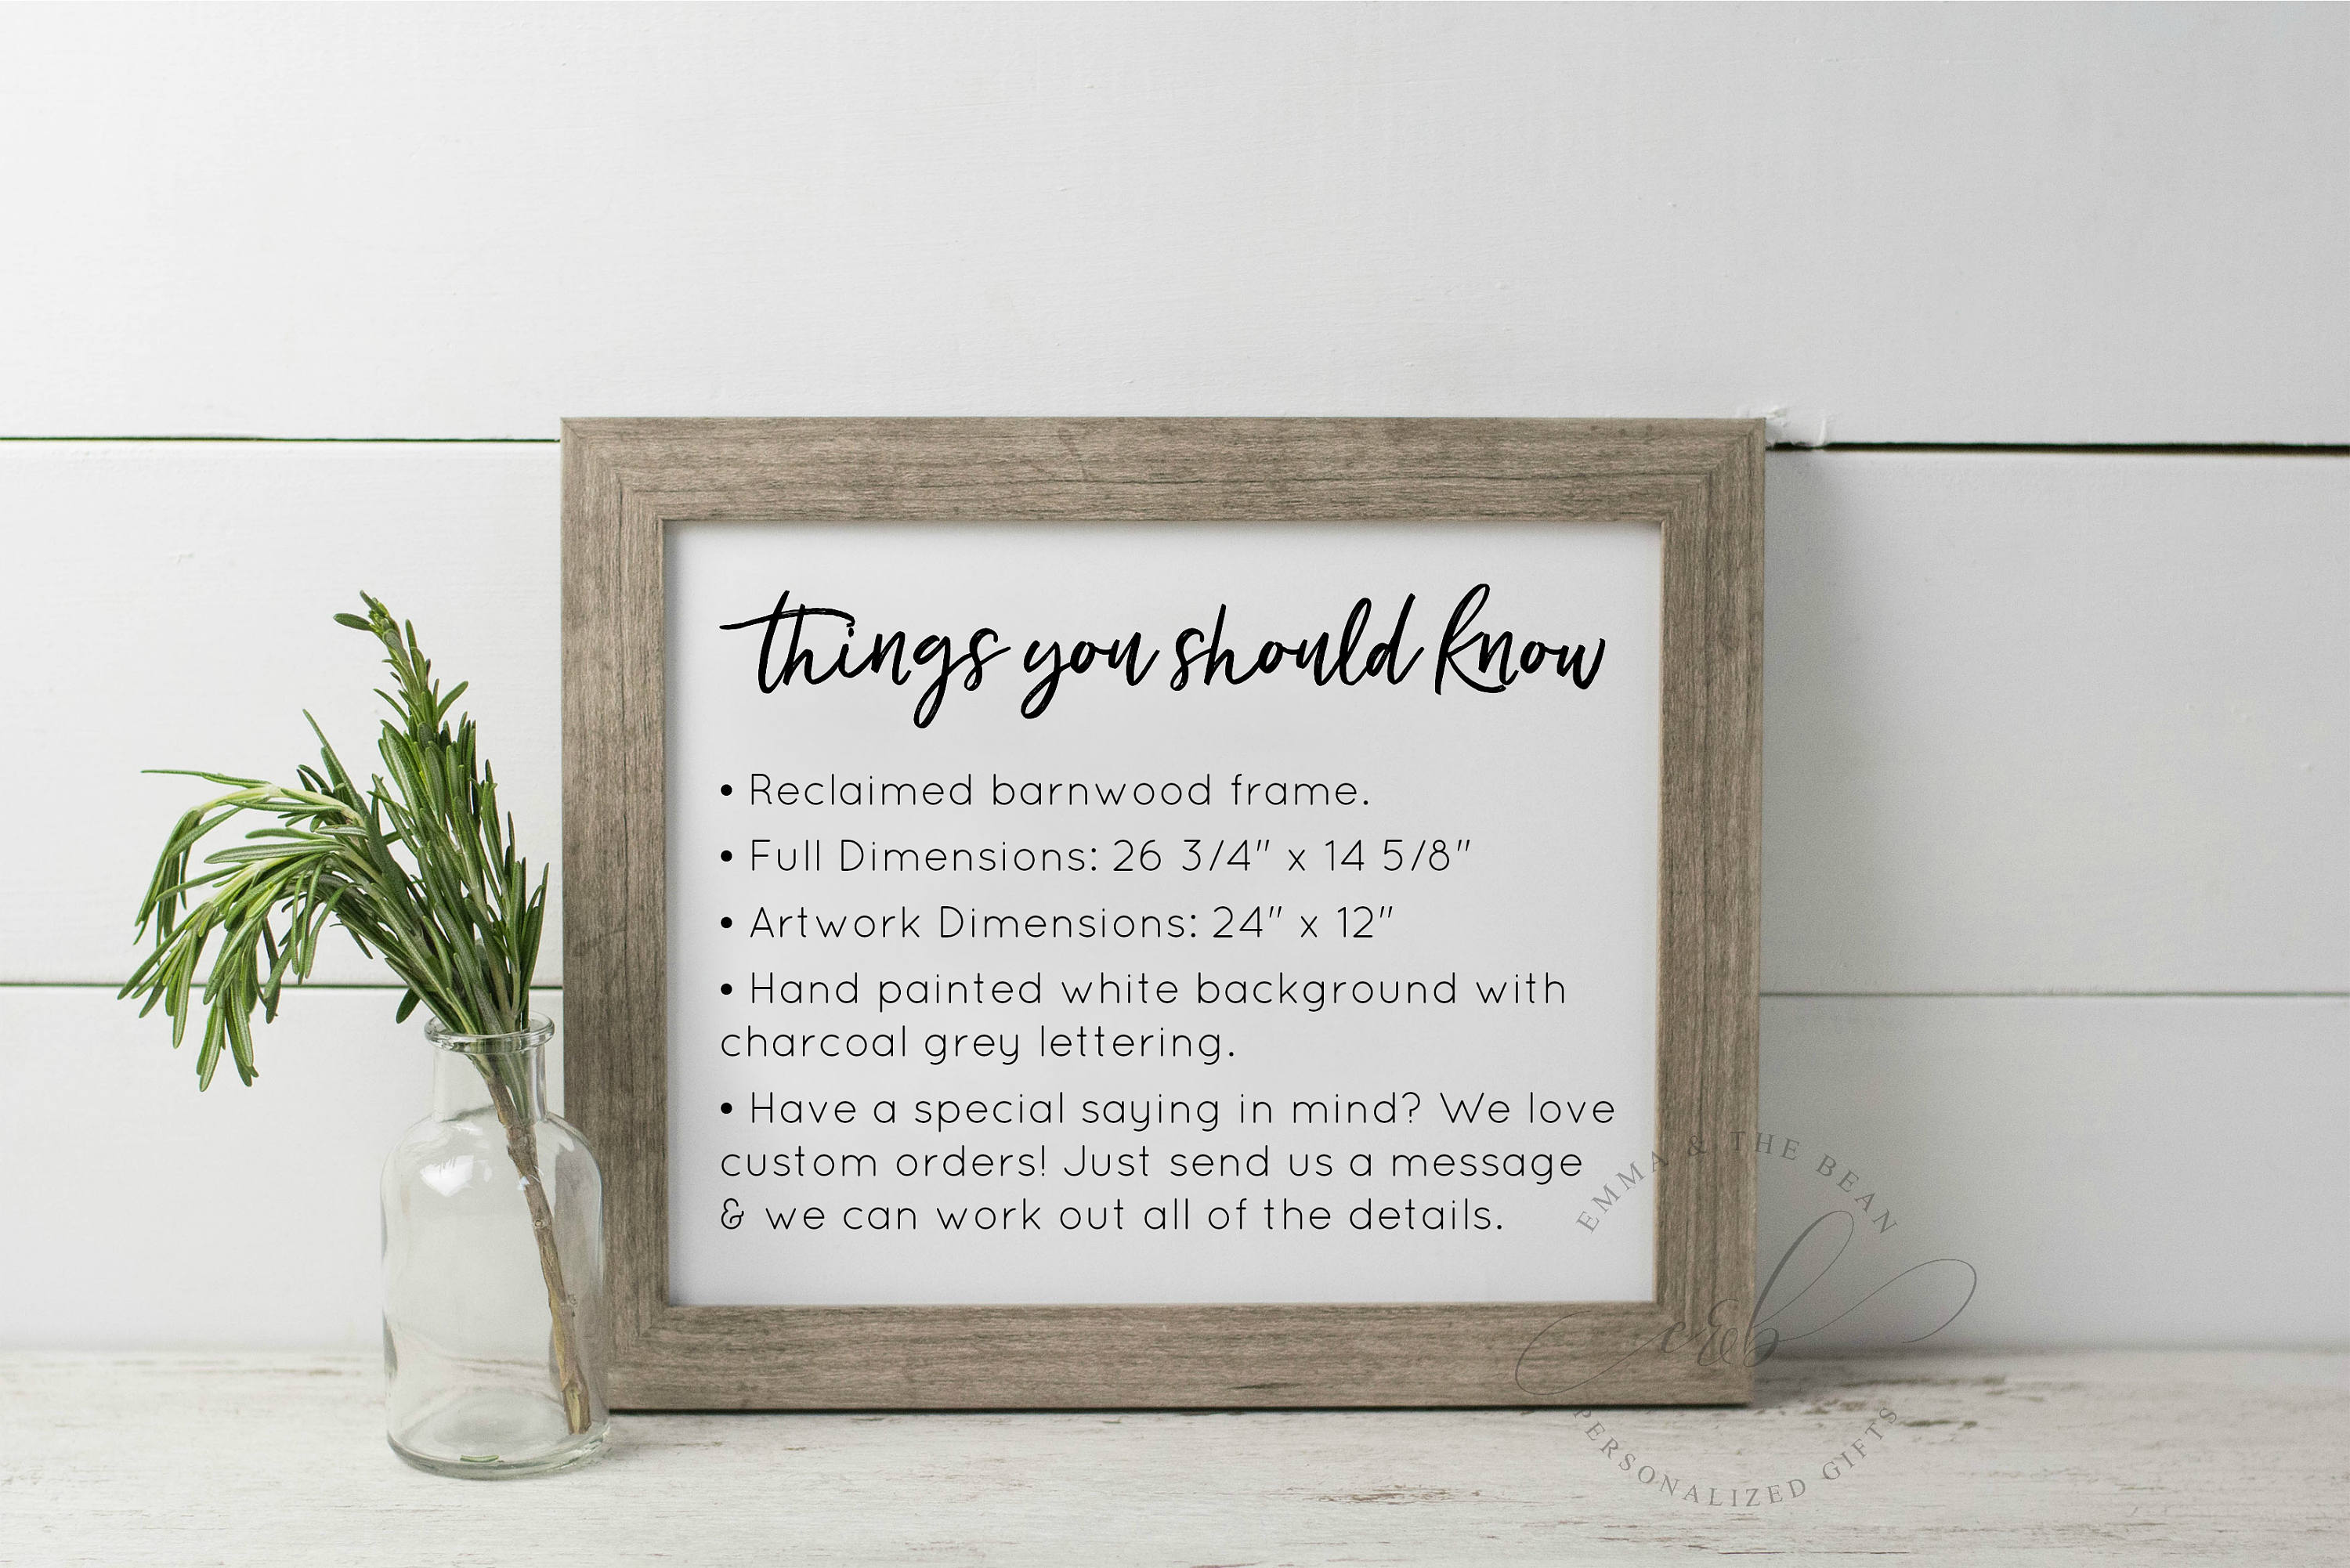 And So Together They Built A Life They Loved - Master Bedroom Wall Decor - Farmhouse Wood Sign